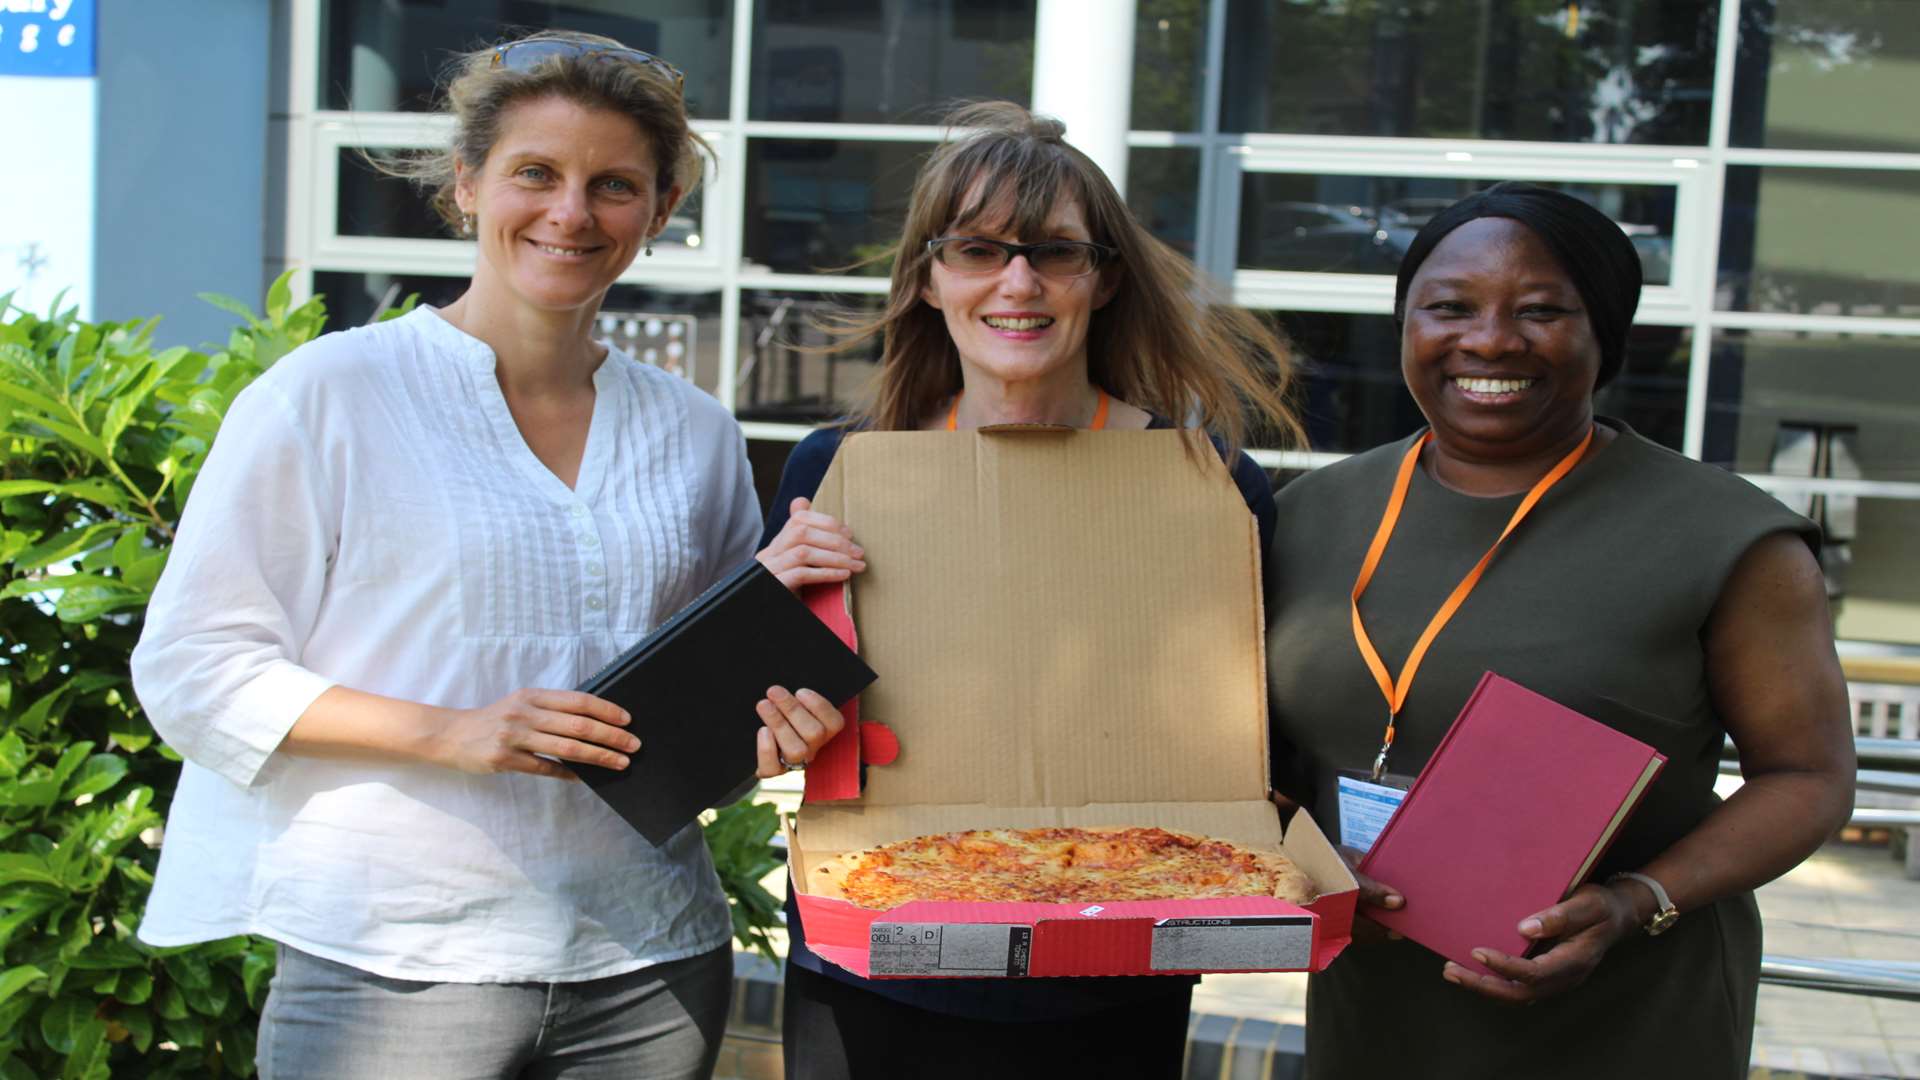 From left: Melissa Murdoch from Amity Fund with Anne Hardy and Ola Odeyemi from Kent Refugee Action Network (KRAN) receive the pizza prize to give to their winning Bookbinders group.